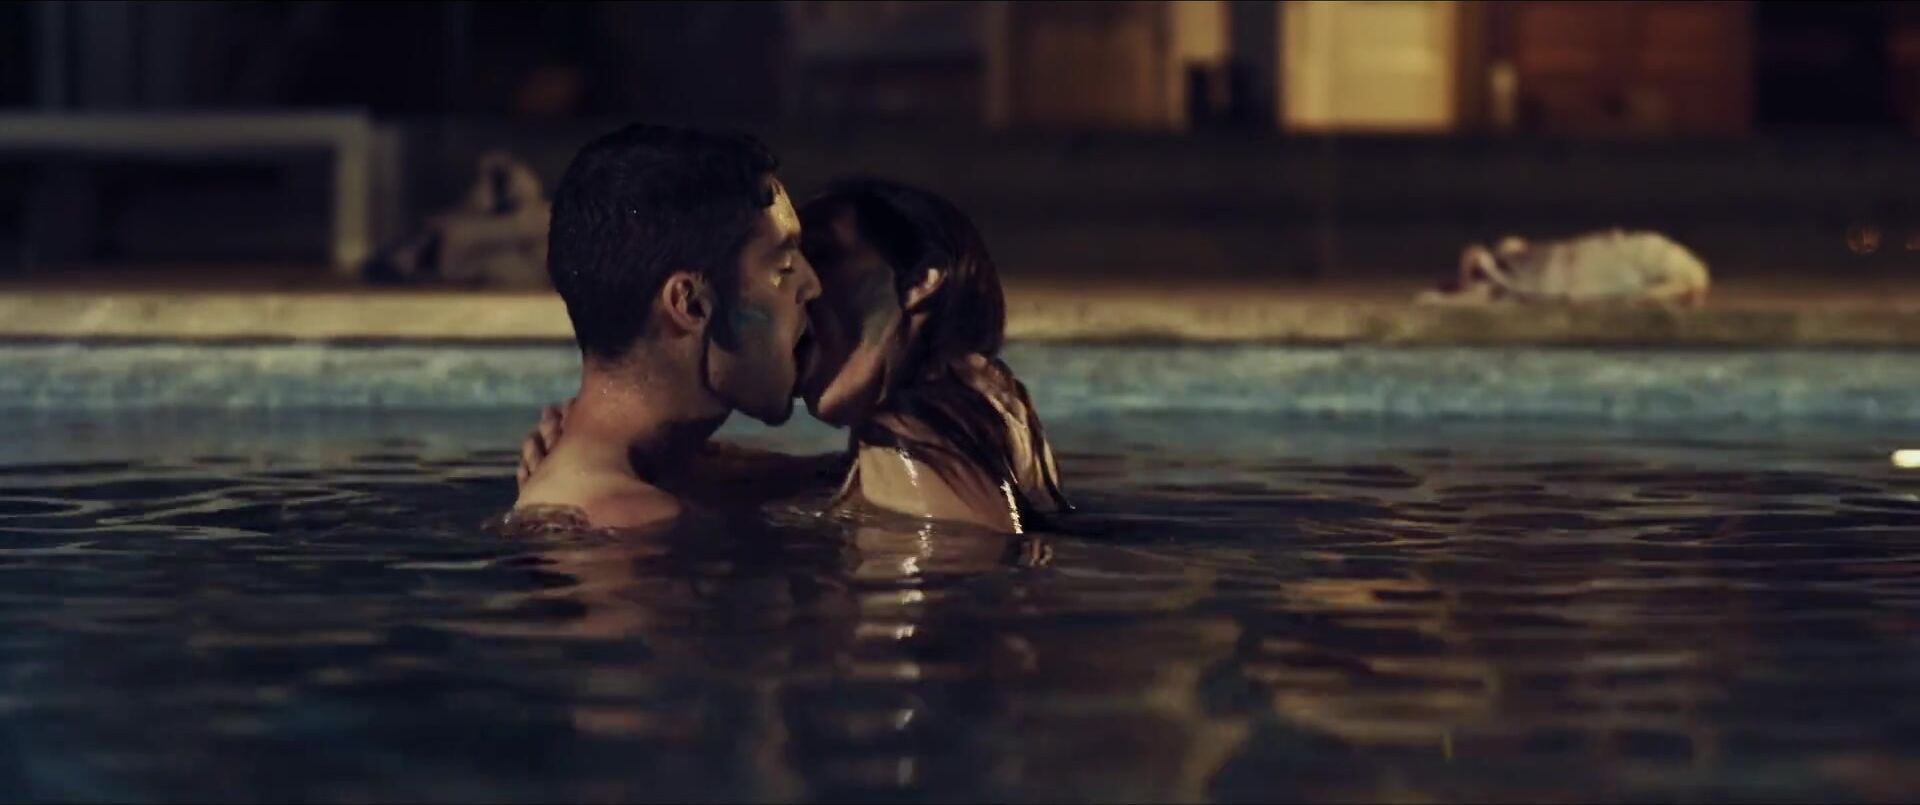 Wet Cunt Ryan Bown kisses Clare McCann in pool and gives sex in bed in feature movie Benefited BoyPost